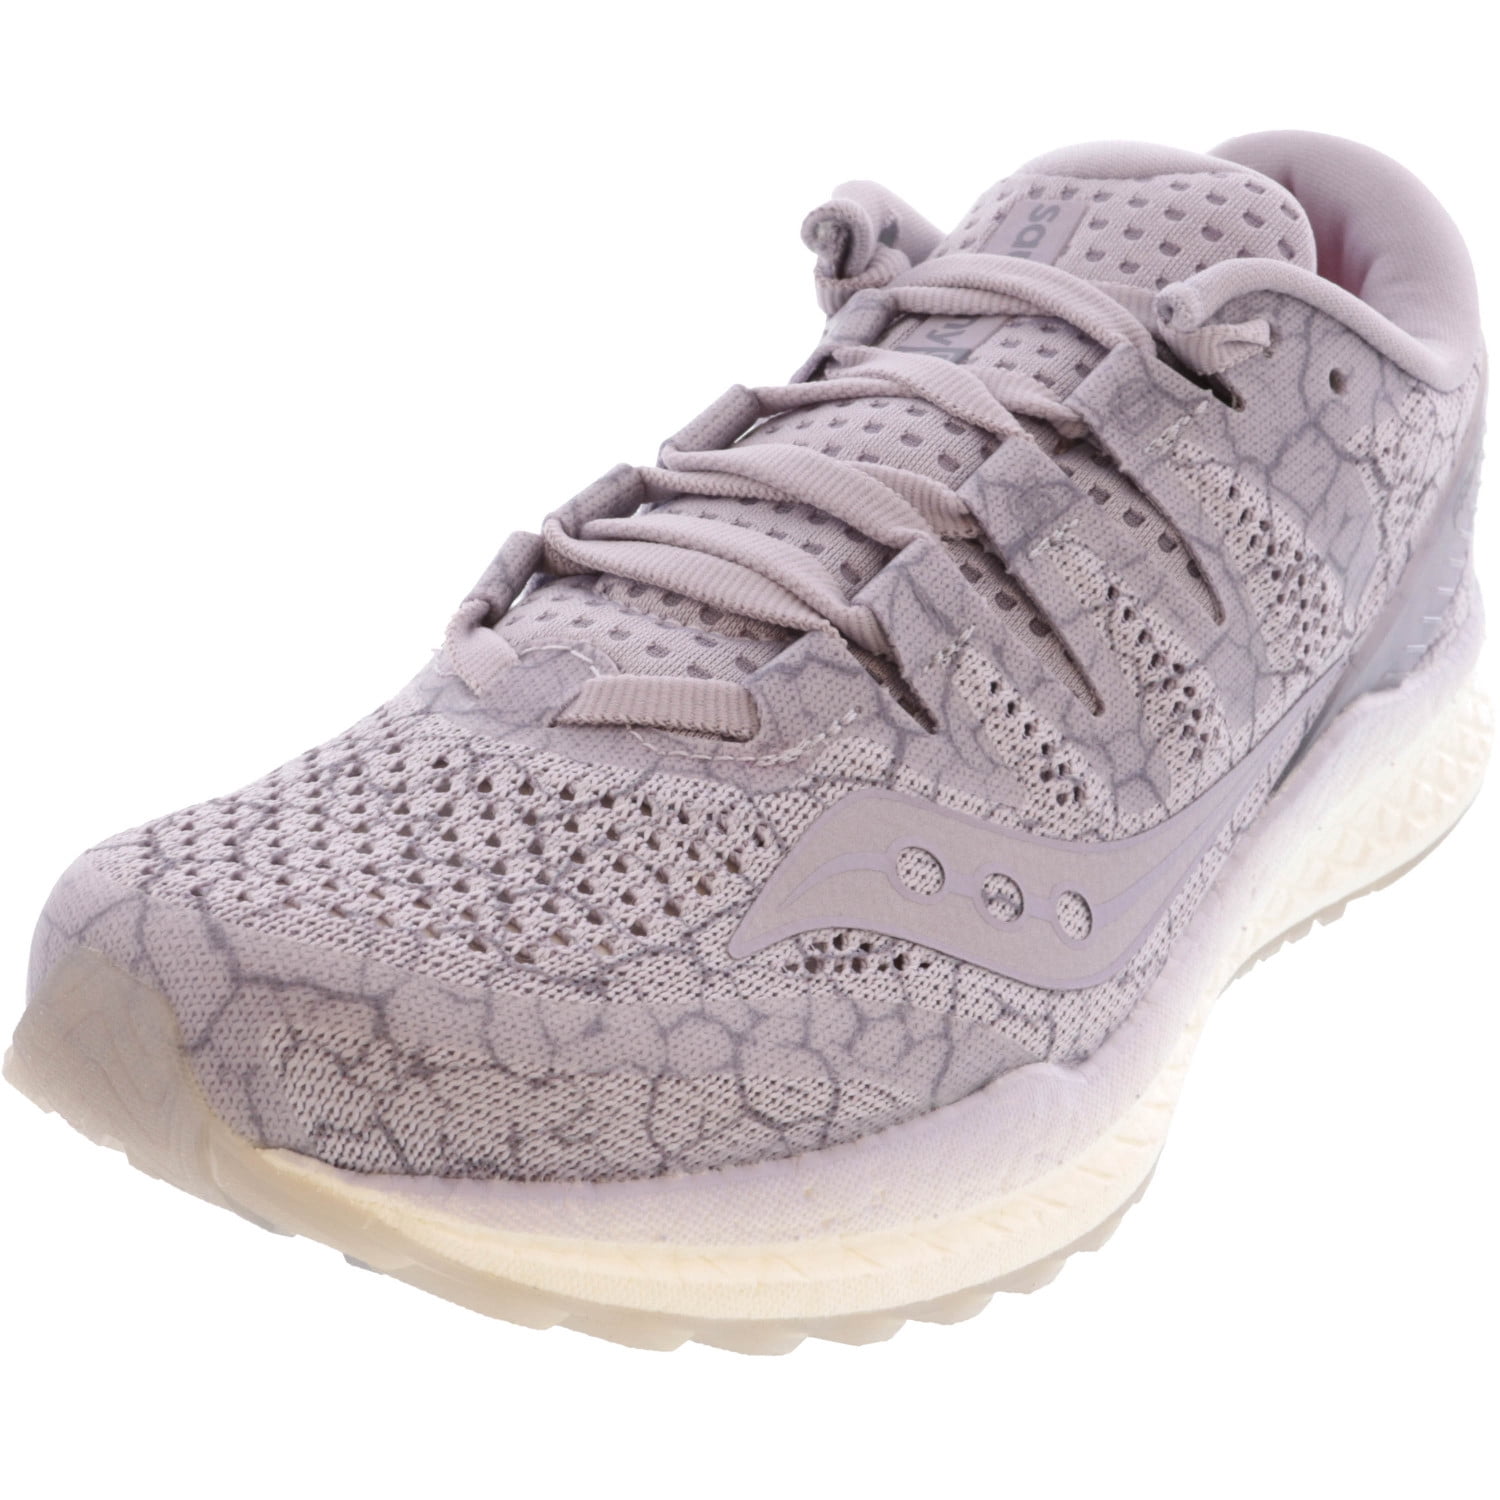 saucony women's freedom iso running shoes